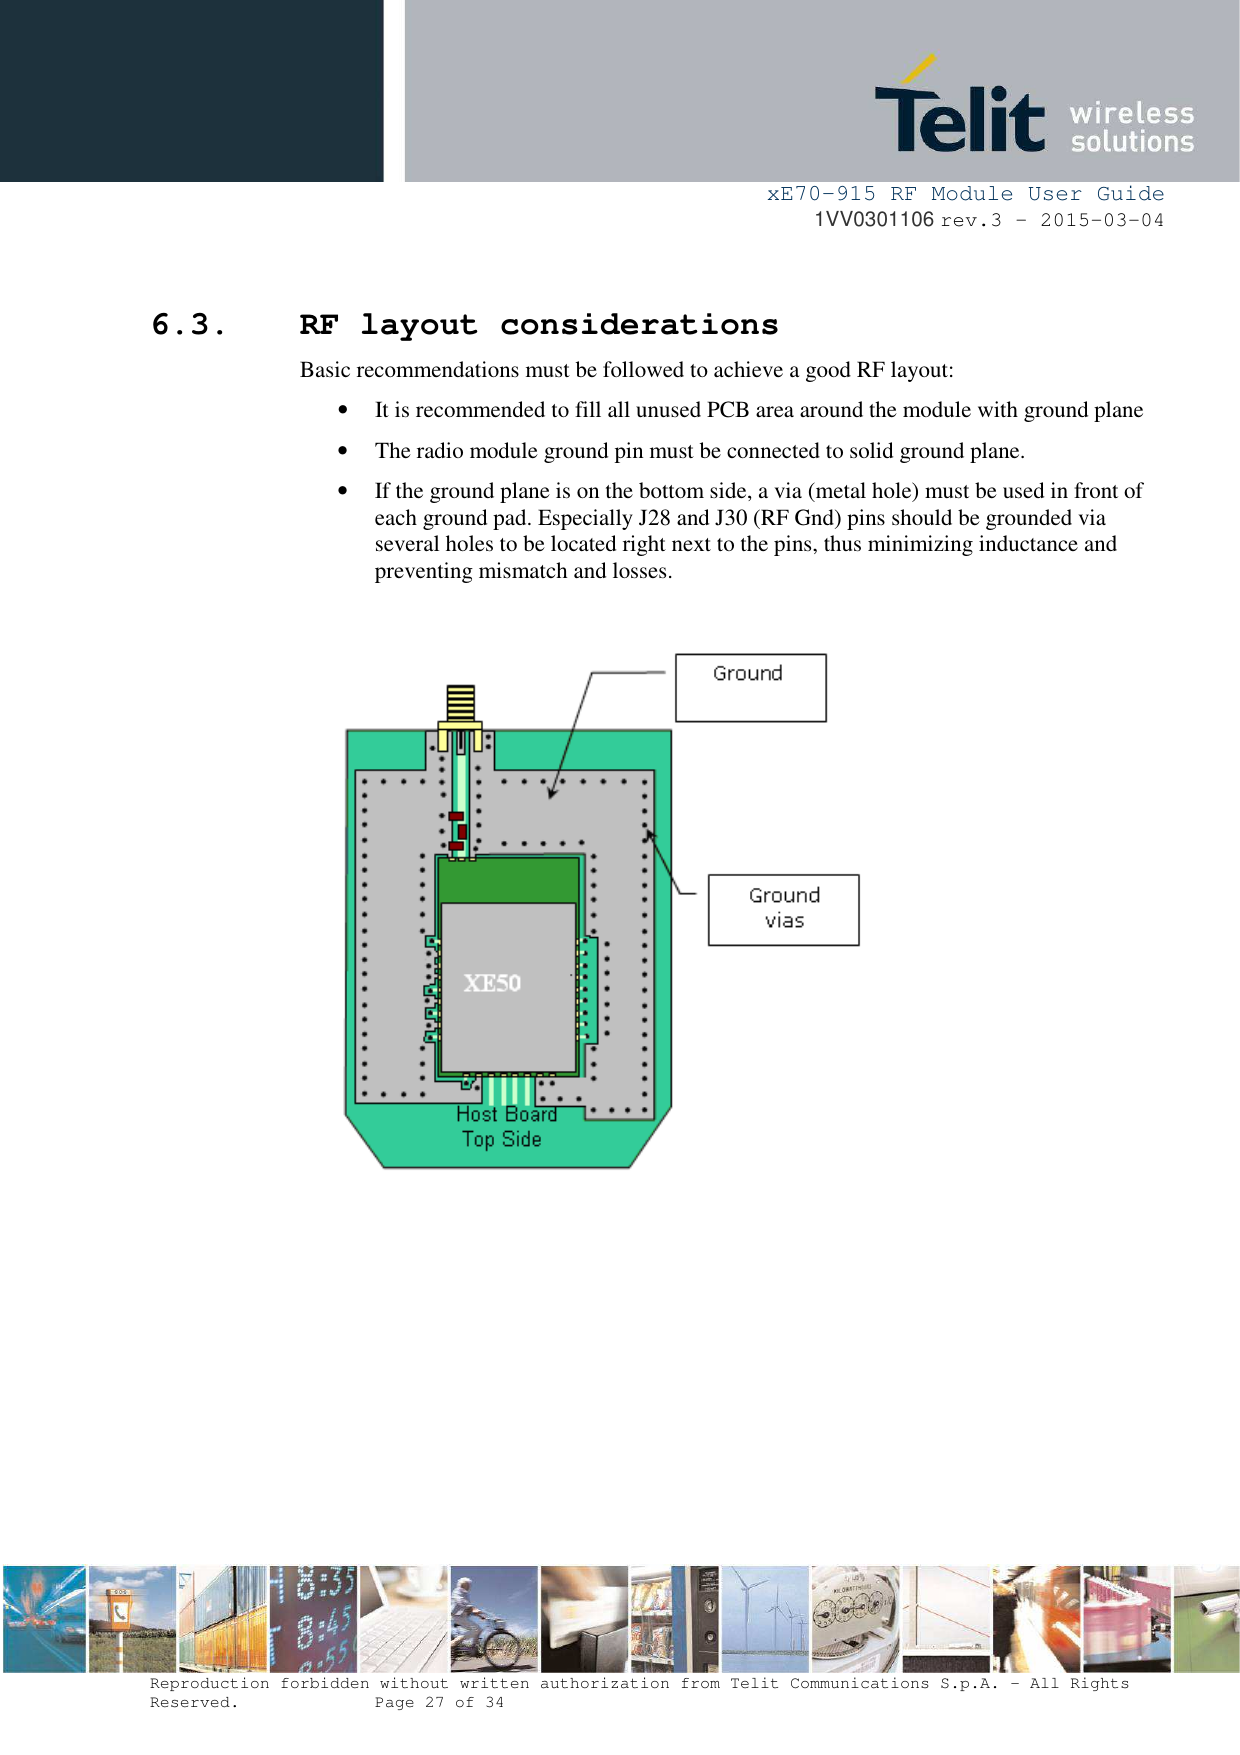     xE70-915 RF Module User Guide 1VV0301106 rev.3 – 2015-03-04  Reproduction forbidden without written authorization from Telit Communications S.p.A. - All Rights Reserved.    Page 27 of 34   6.3. RF layout considerations Basic recommendations must be followed to achieve a good RF layout: • It is recommended to fill all unused PCB area around the module with ground plane  • The radio module ground pin must be connected to solid ground plane. • If the ground plane is on the bottom side, a via (metal hole) must be used in front of each ground pad. Especially J28 and J30 (RF Gnd) pins should be grounded via several holes to be located right next to the pins, thus minimizing inductance and preventing mismatch and losses.            